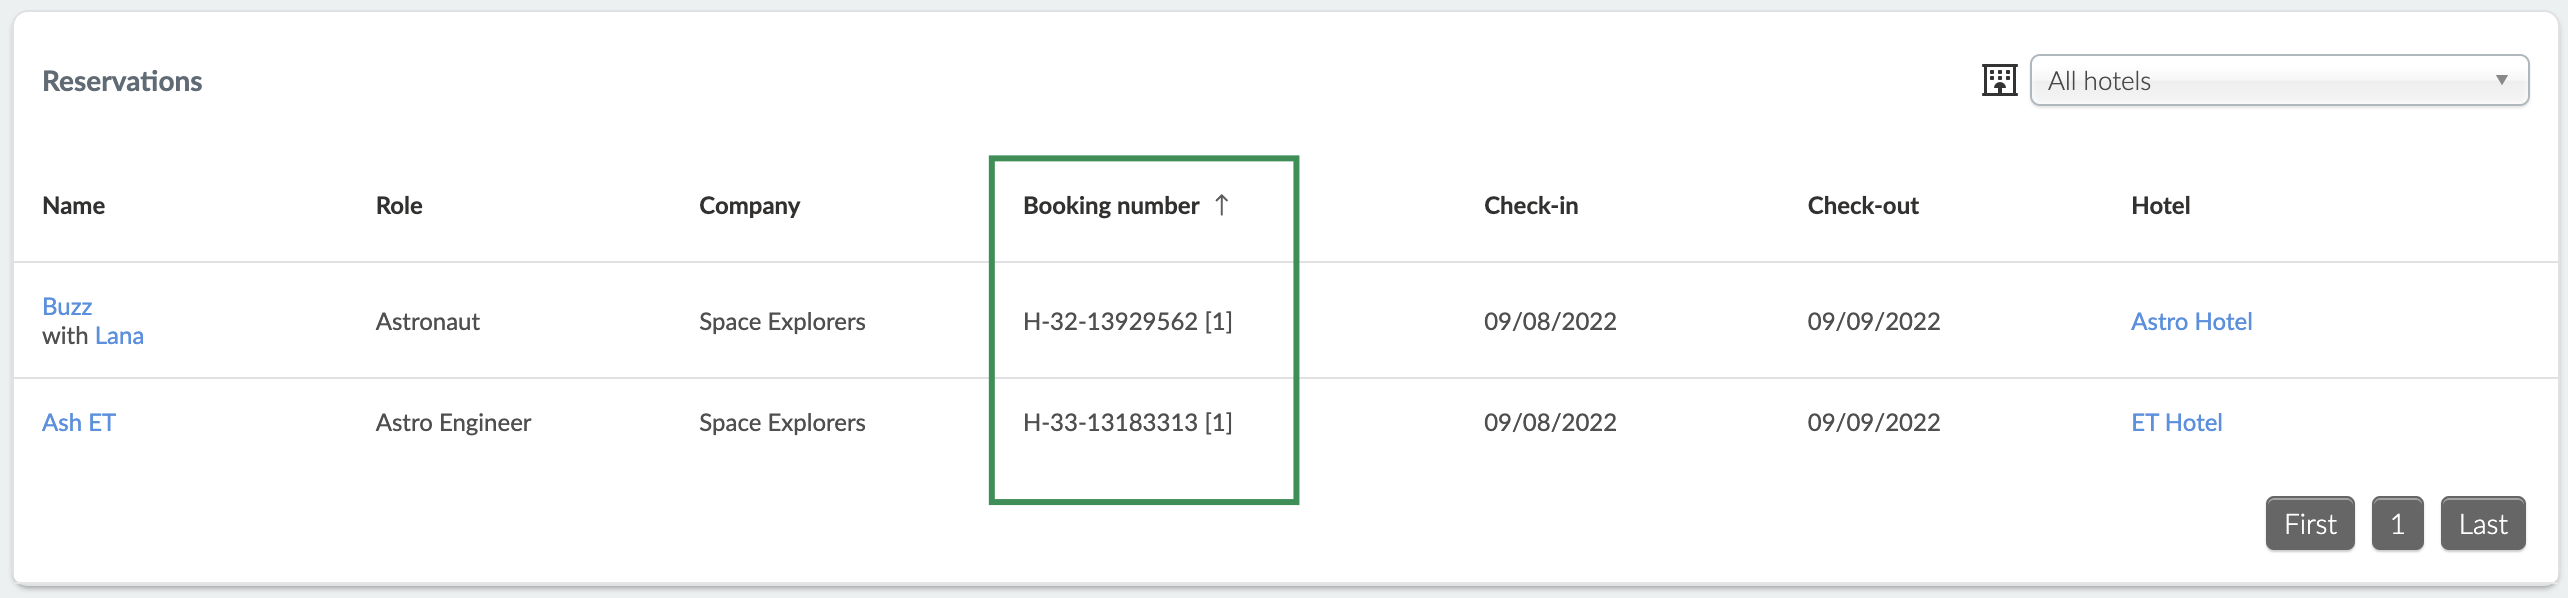 Image showing the booking number field on the reservations page